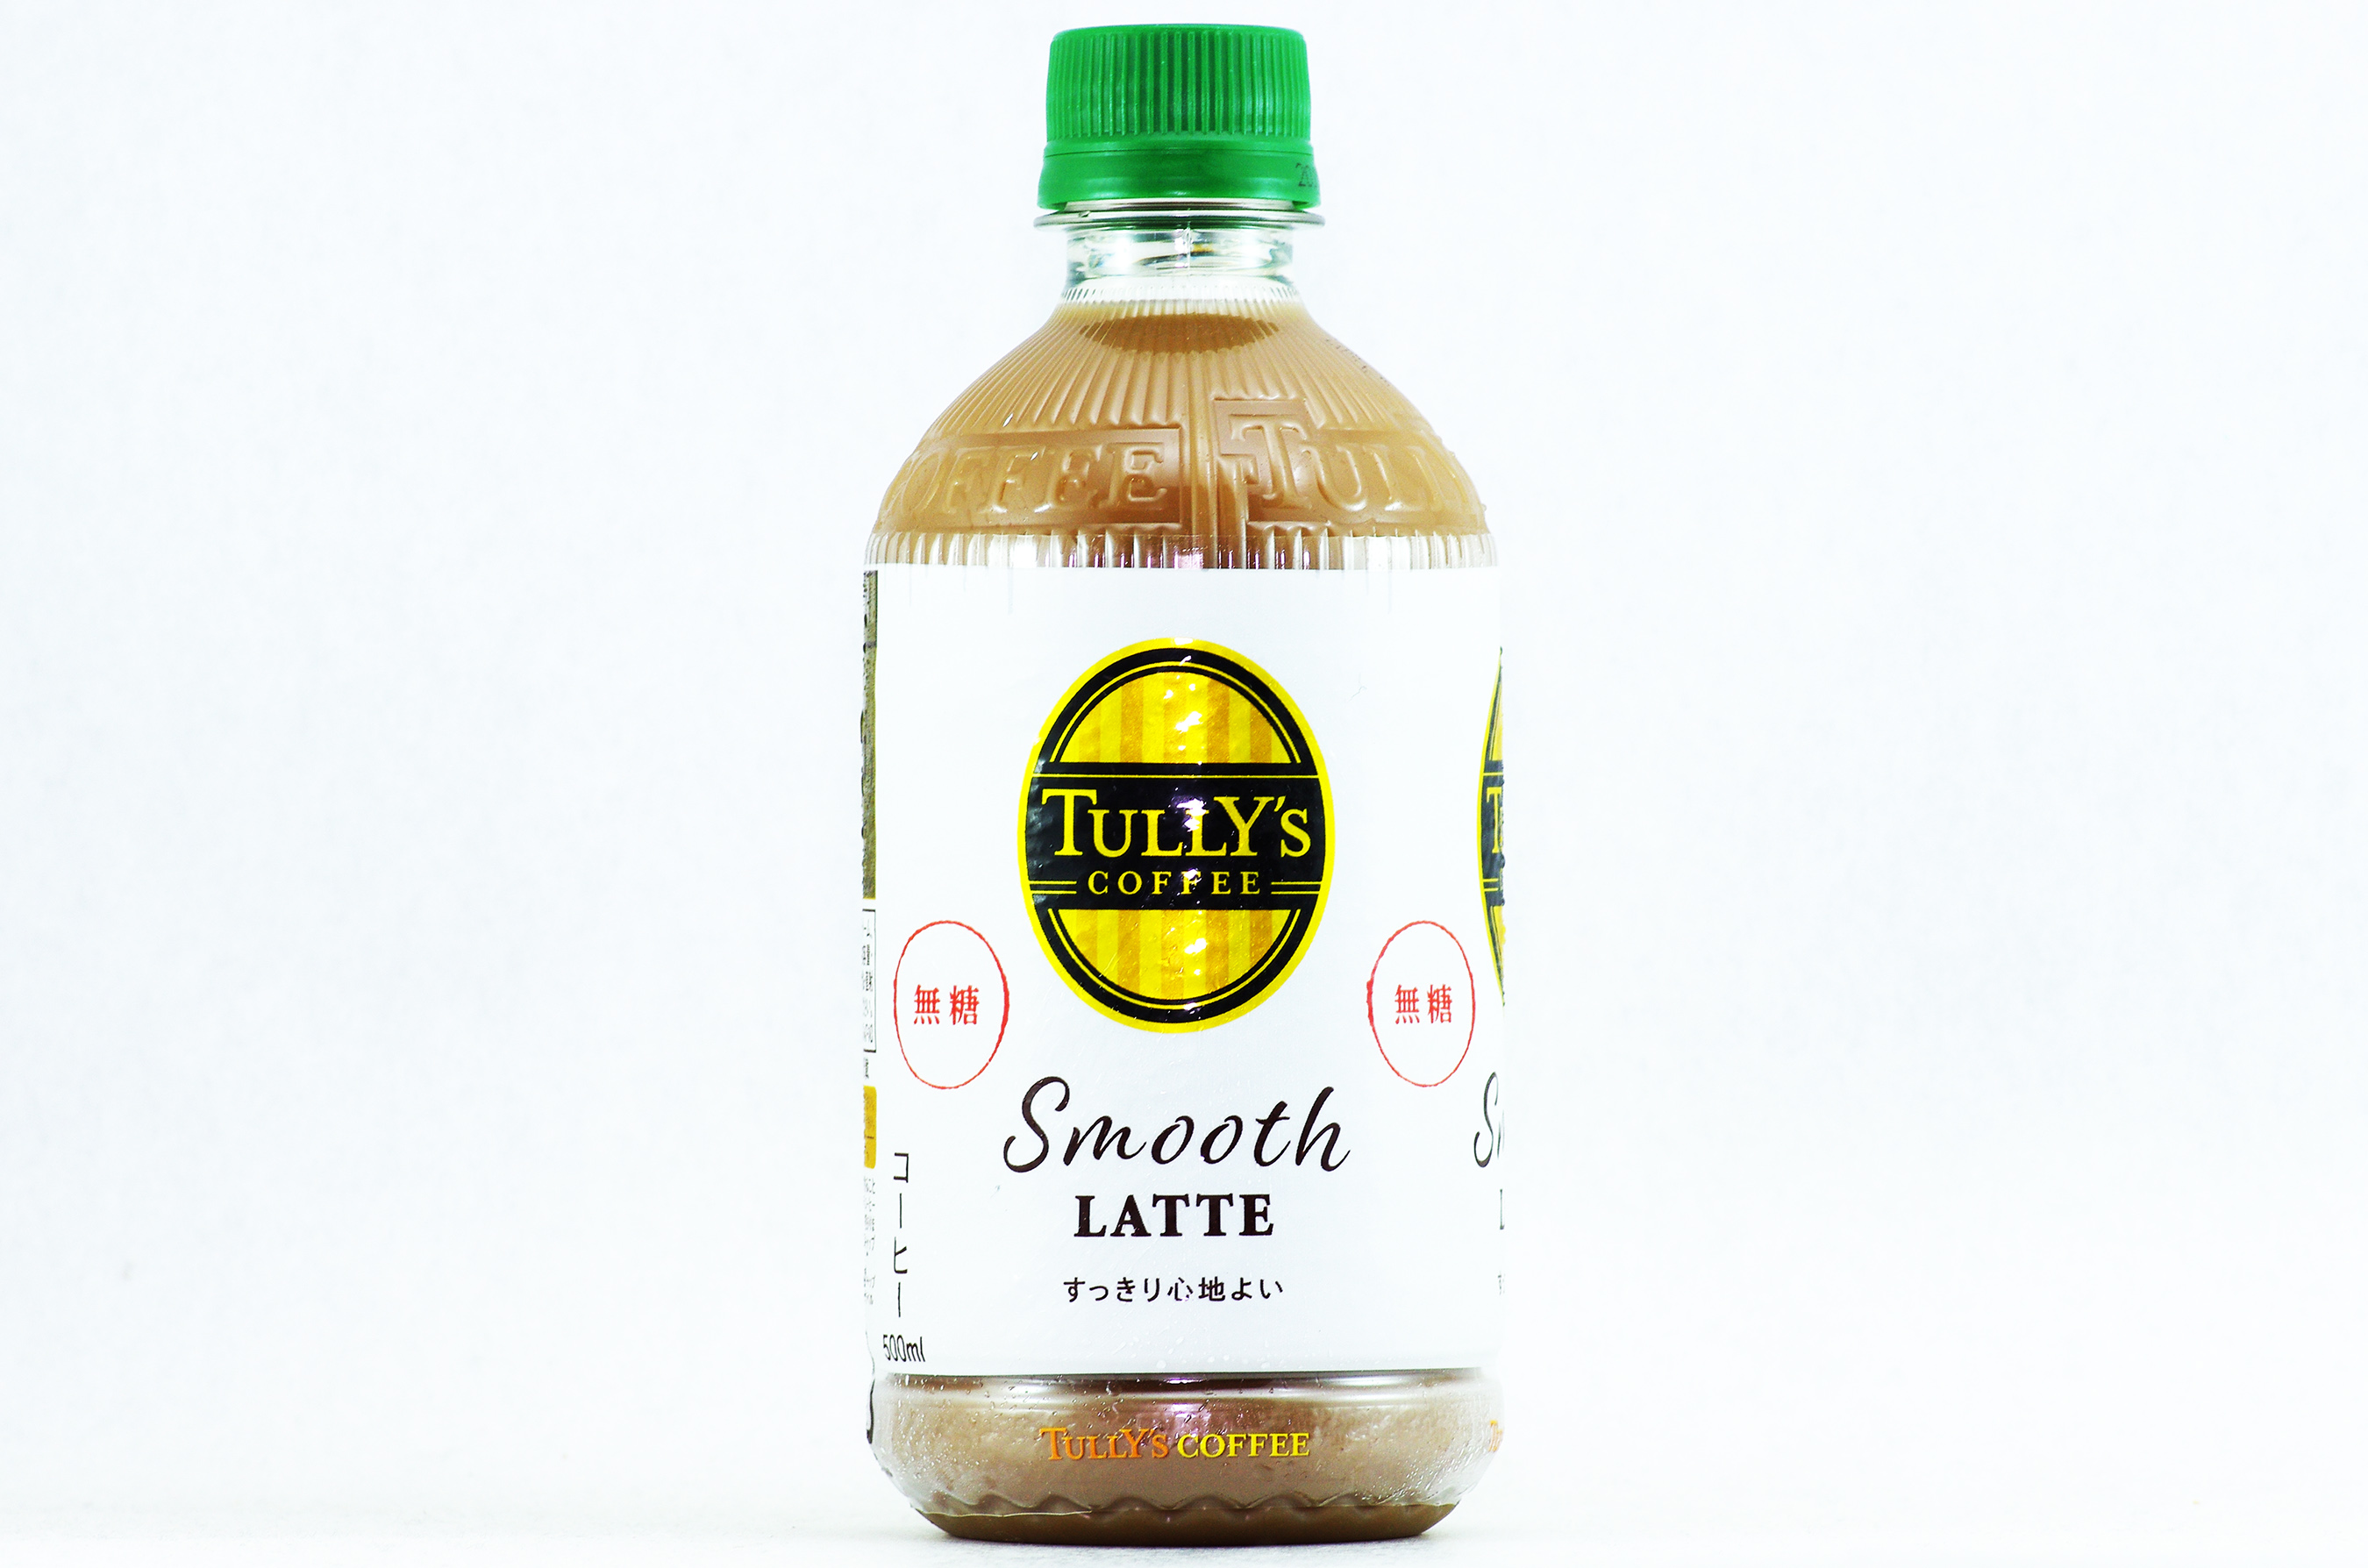 TULLY'S COFFEE Smooth LATTE